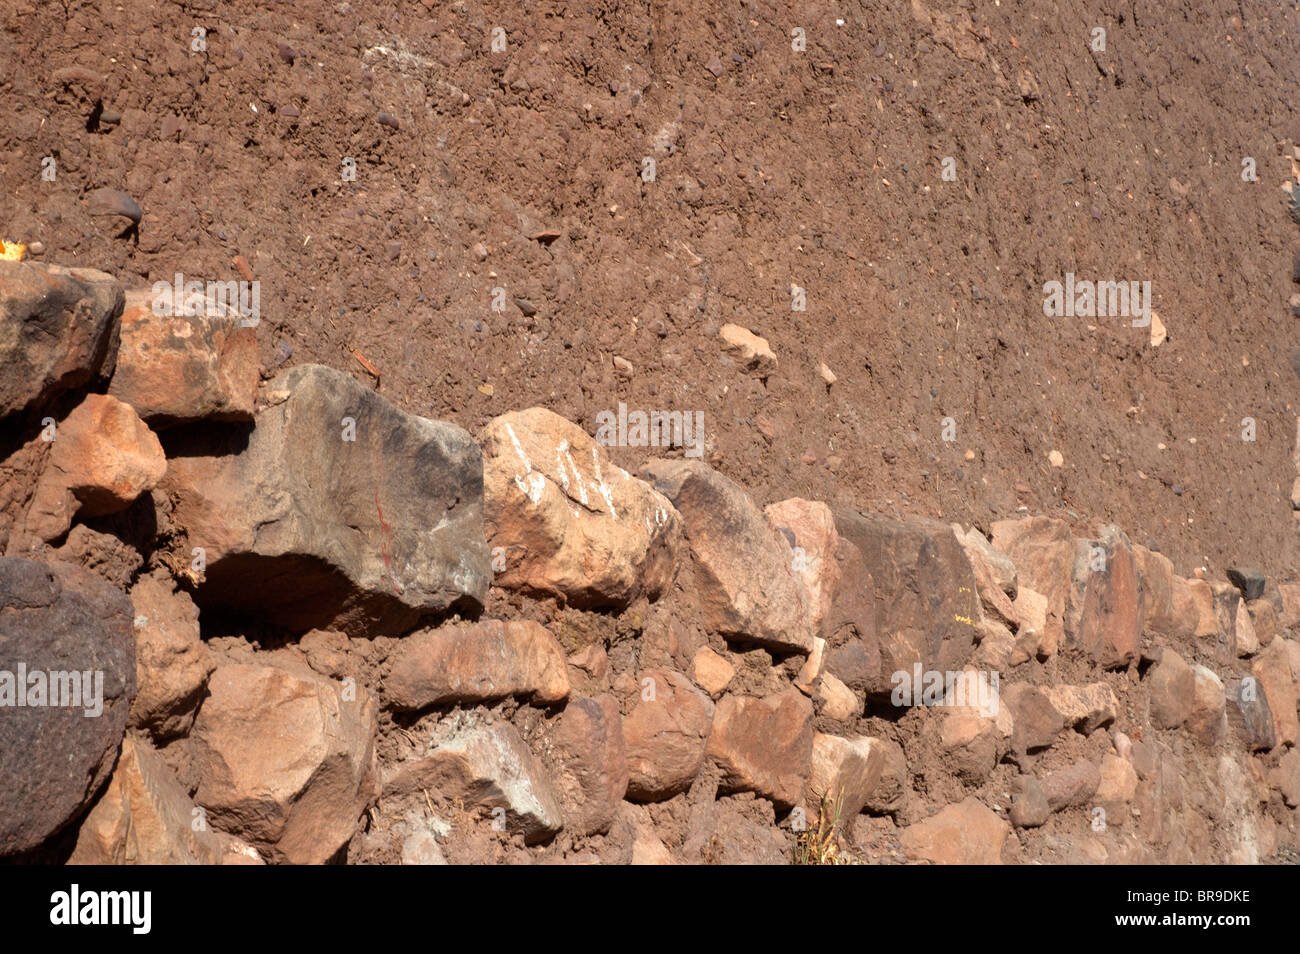 Stone and adobe, (mud brick), form a contrast of building materials for the walls of a house at Pucara, Peru. Stock Photo